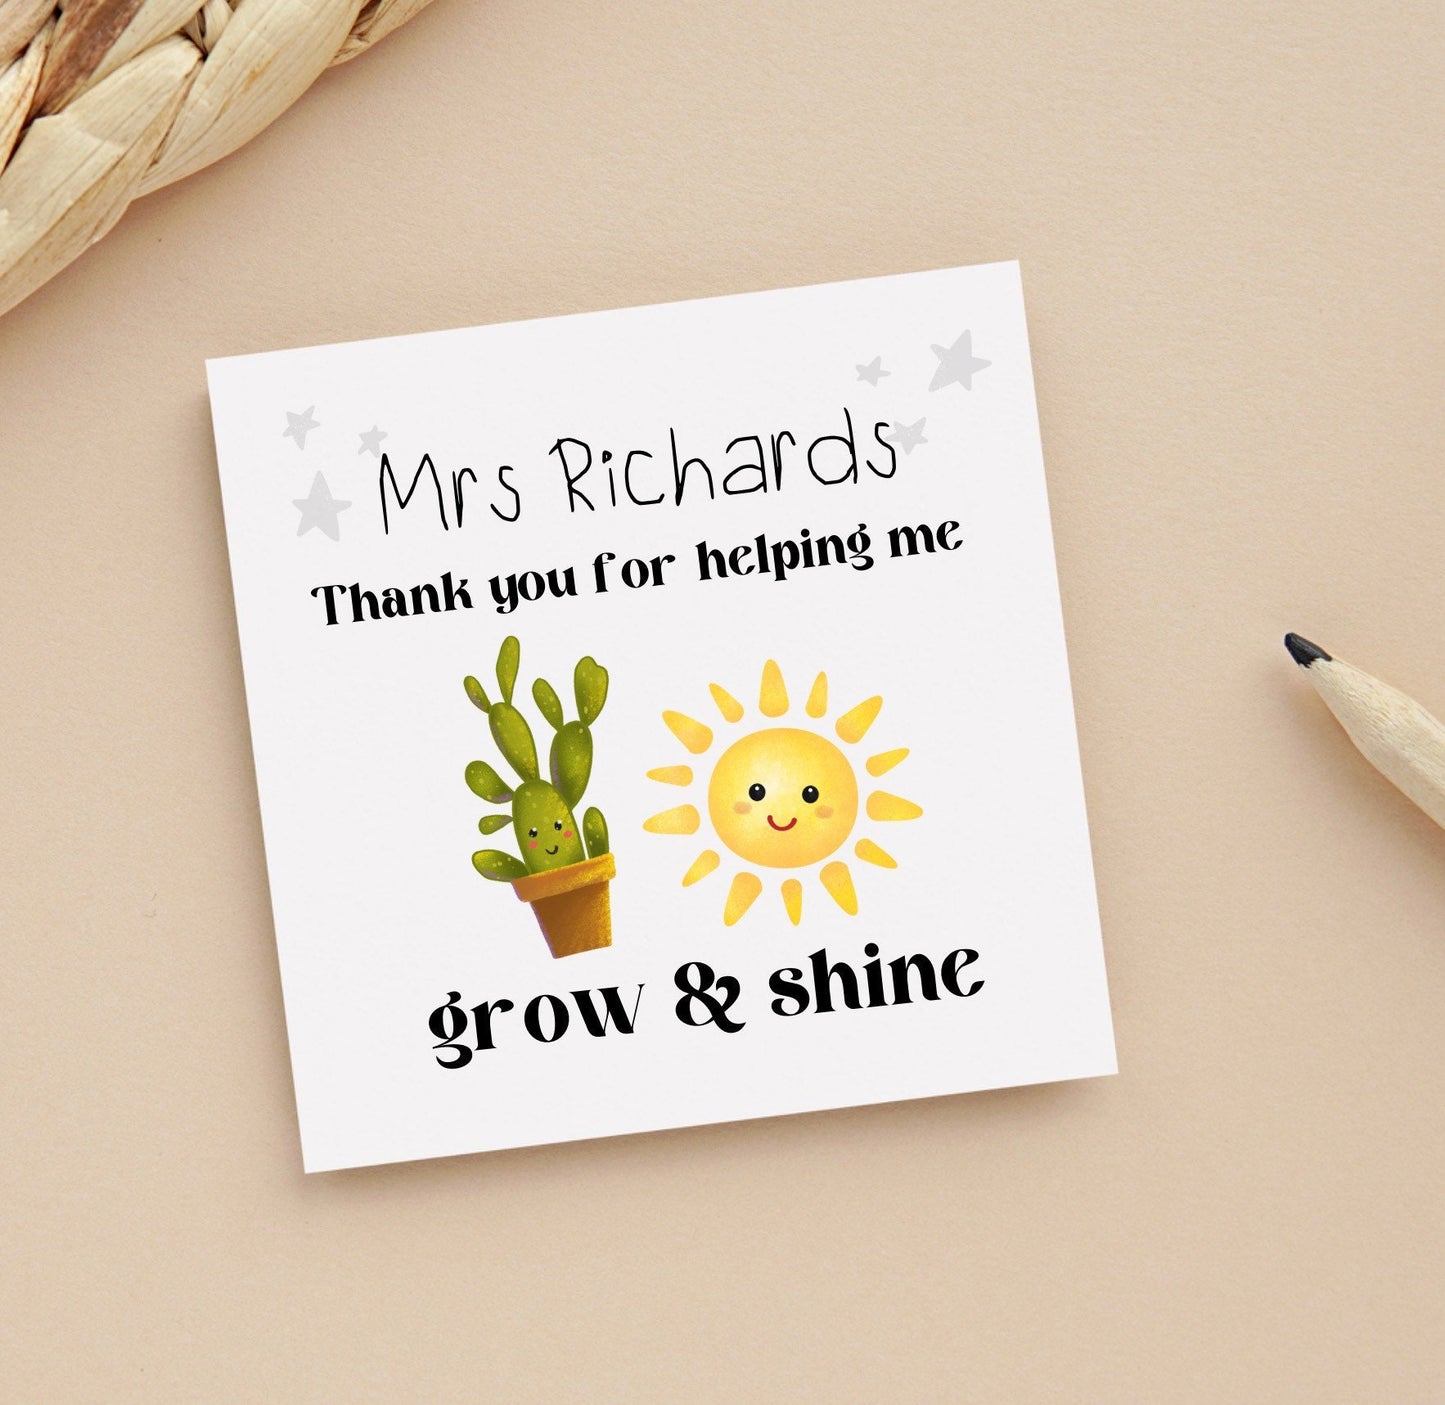 Teacher and Teaching assistant thank you card from children, thank you card from pre-schoolers, personalised teacher appreciation card